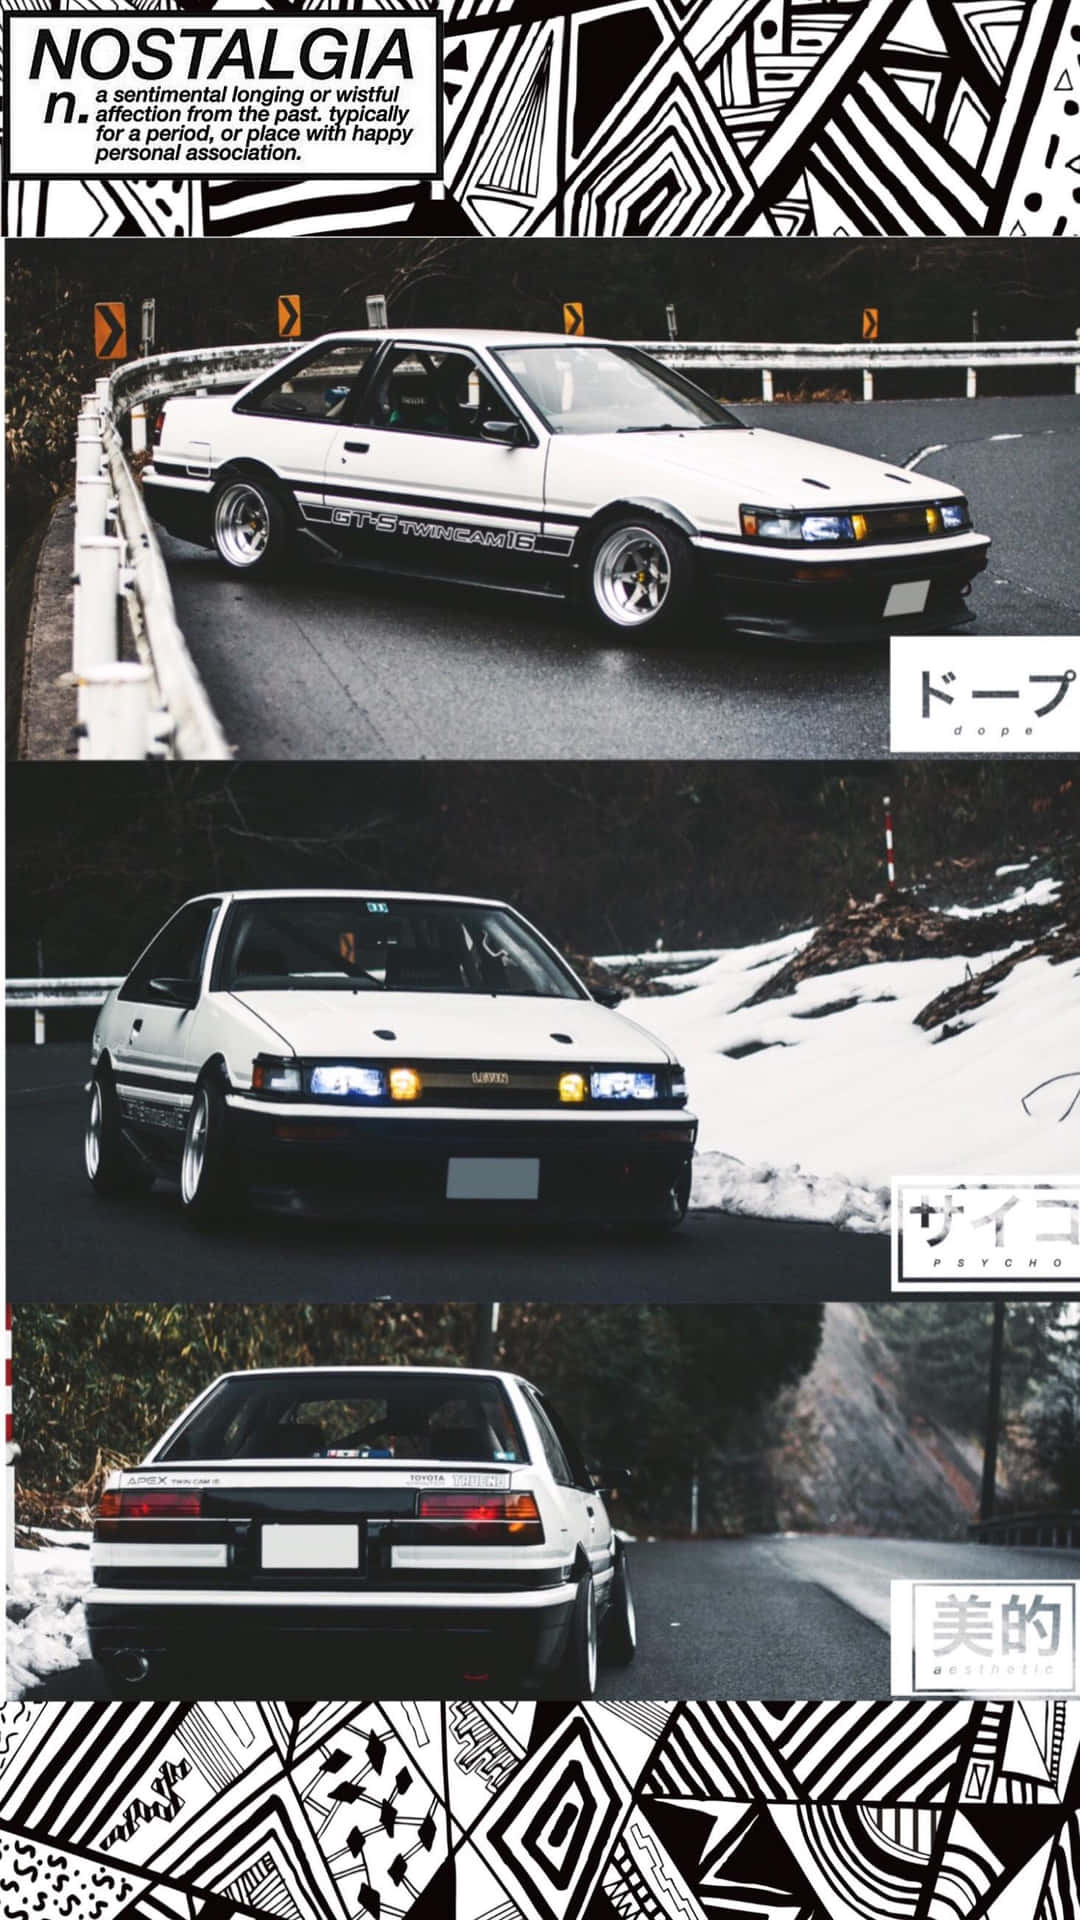 "The Iconic AE86" Wallpaper